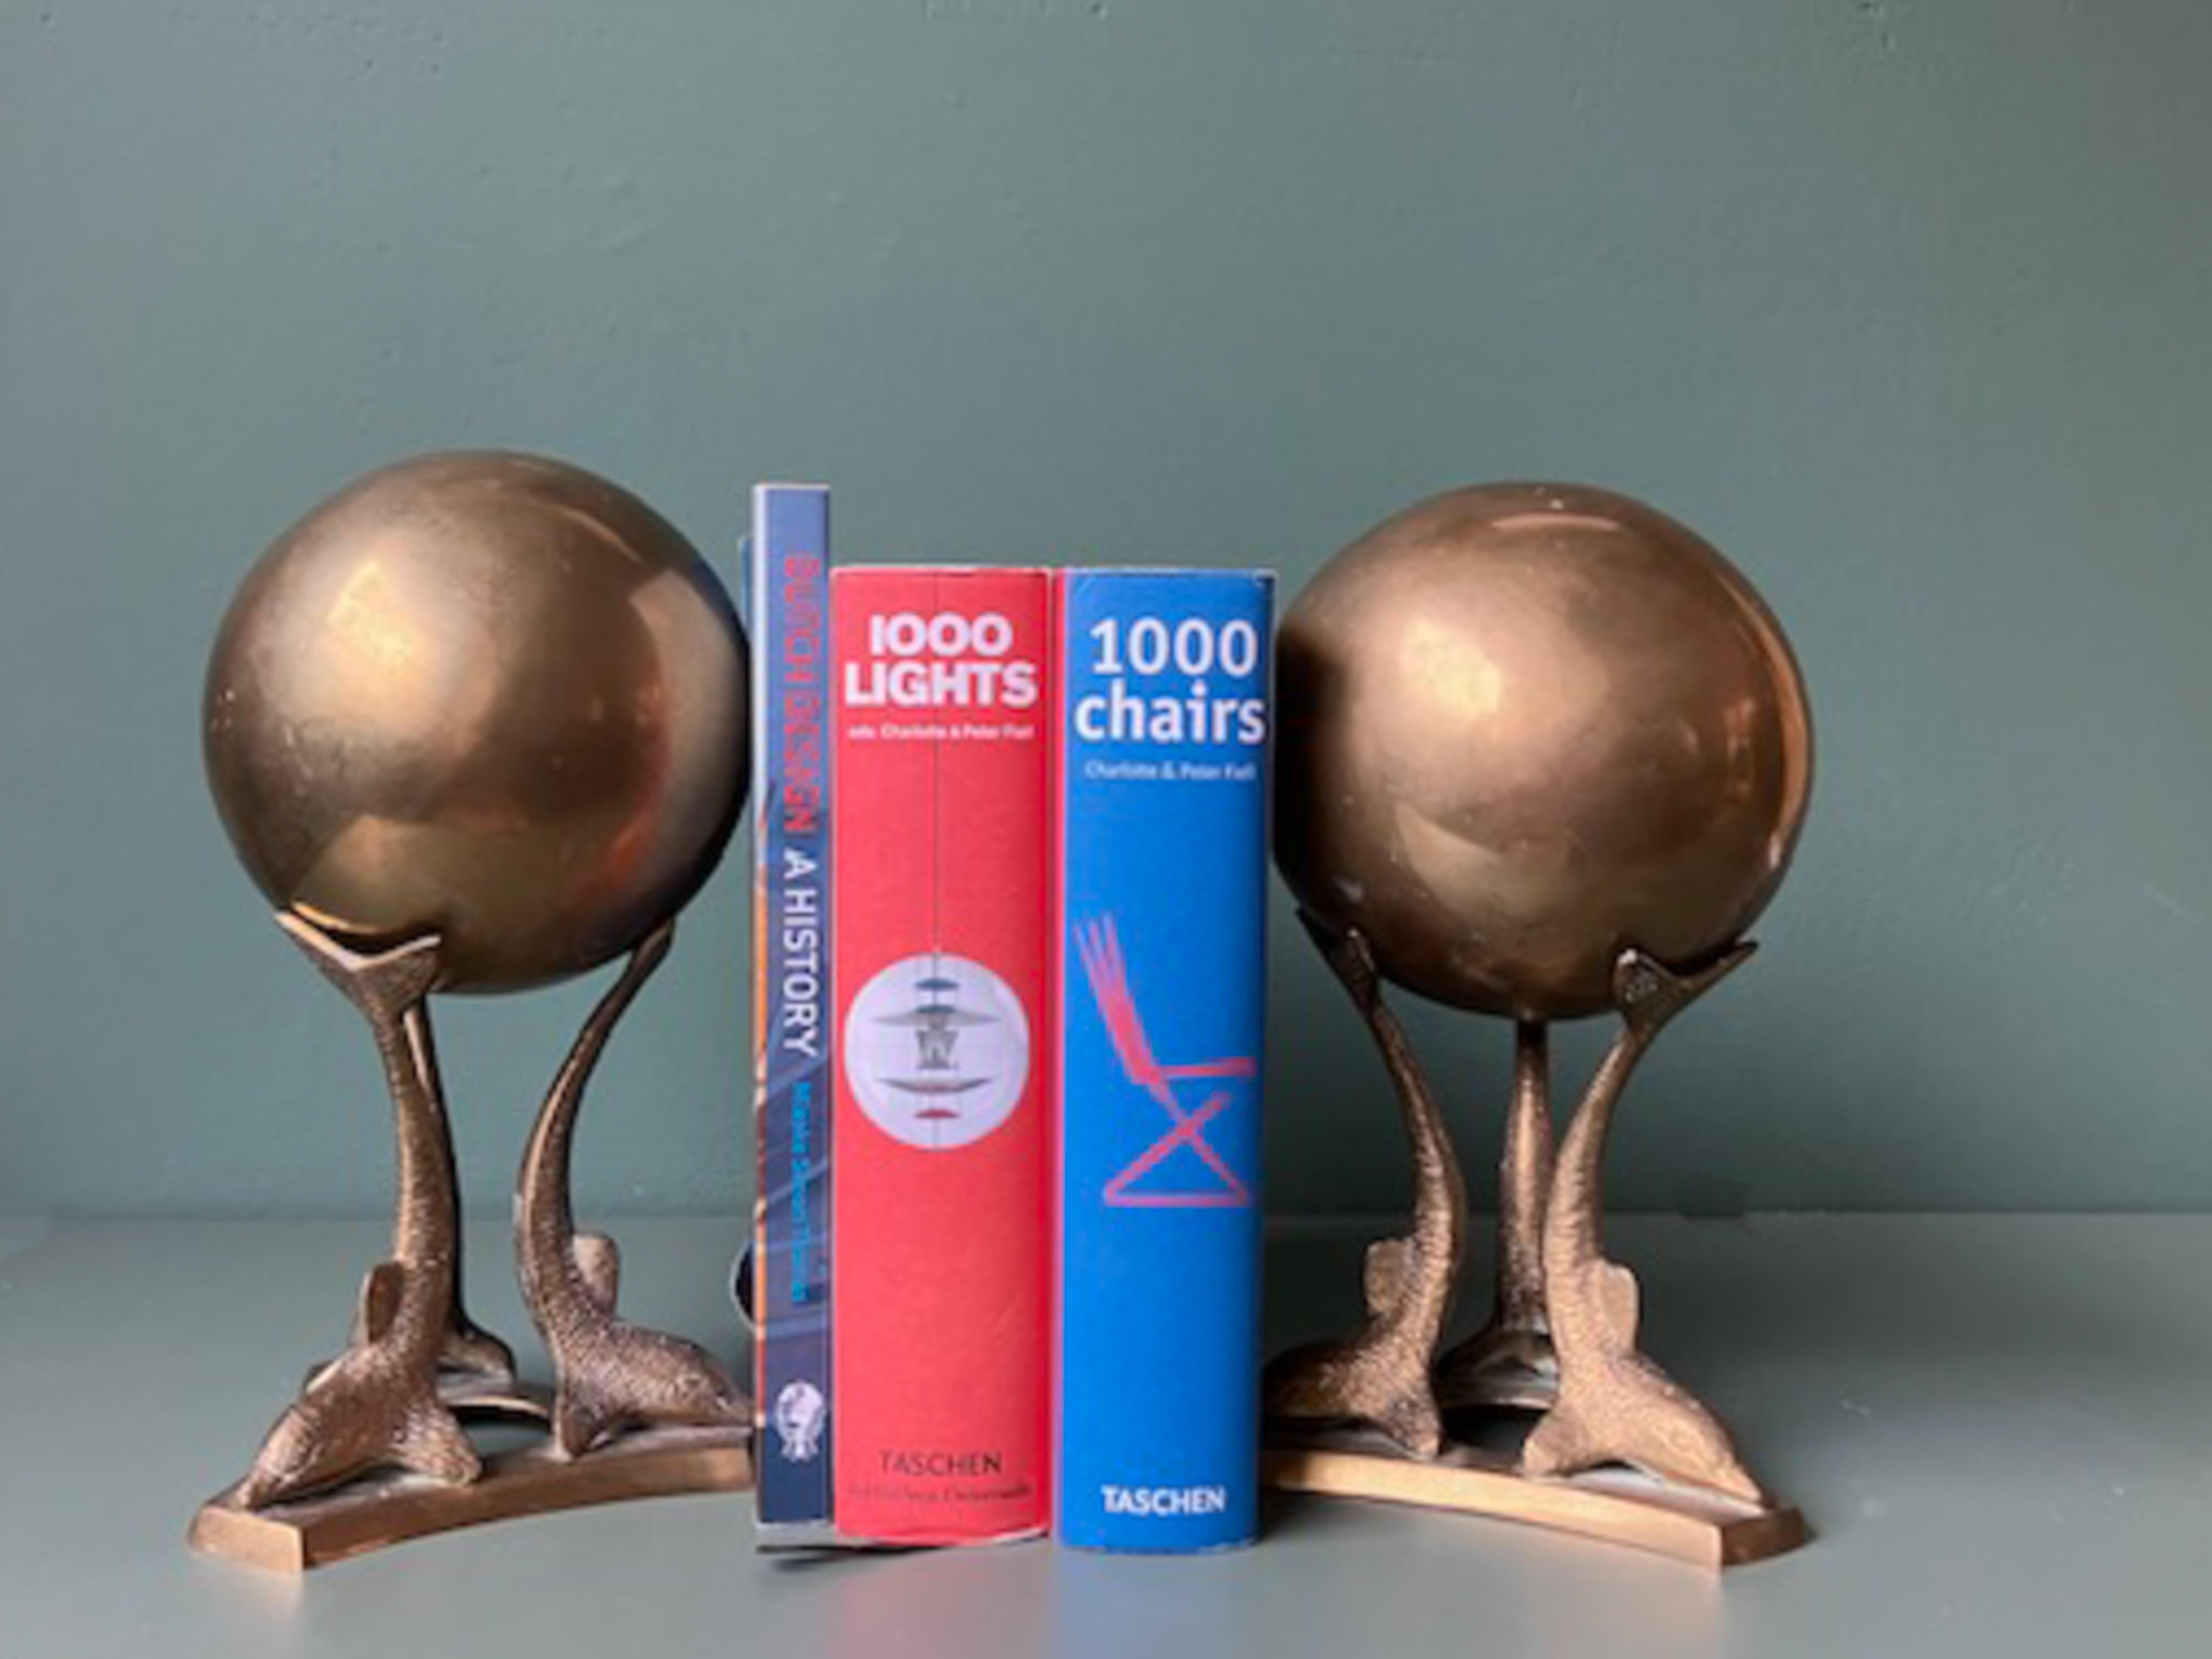 Unique pair of bookends, each of three dolphins holding a big globe They are made of brass. It is a beautiful set for any home or office decor and would look great on table top or bookshelf. They are in vintage condition (they havemarks and wear